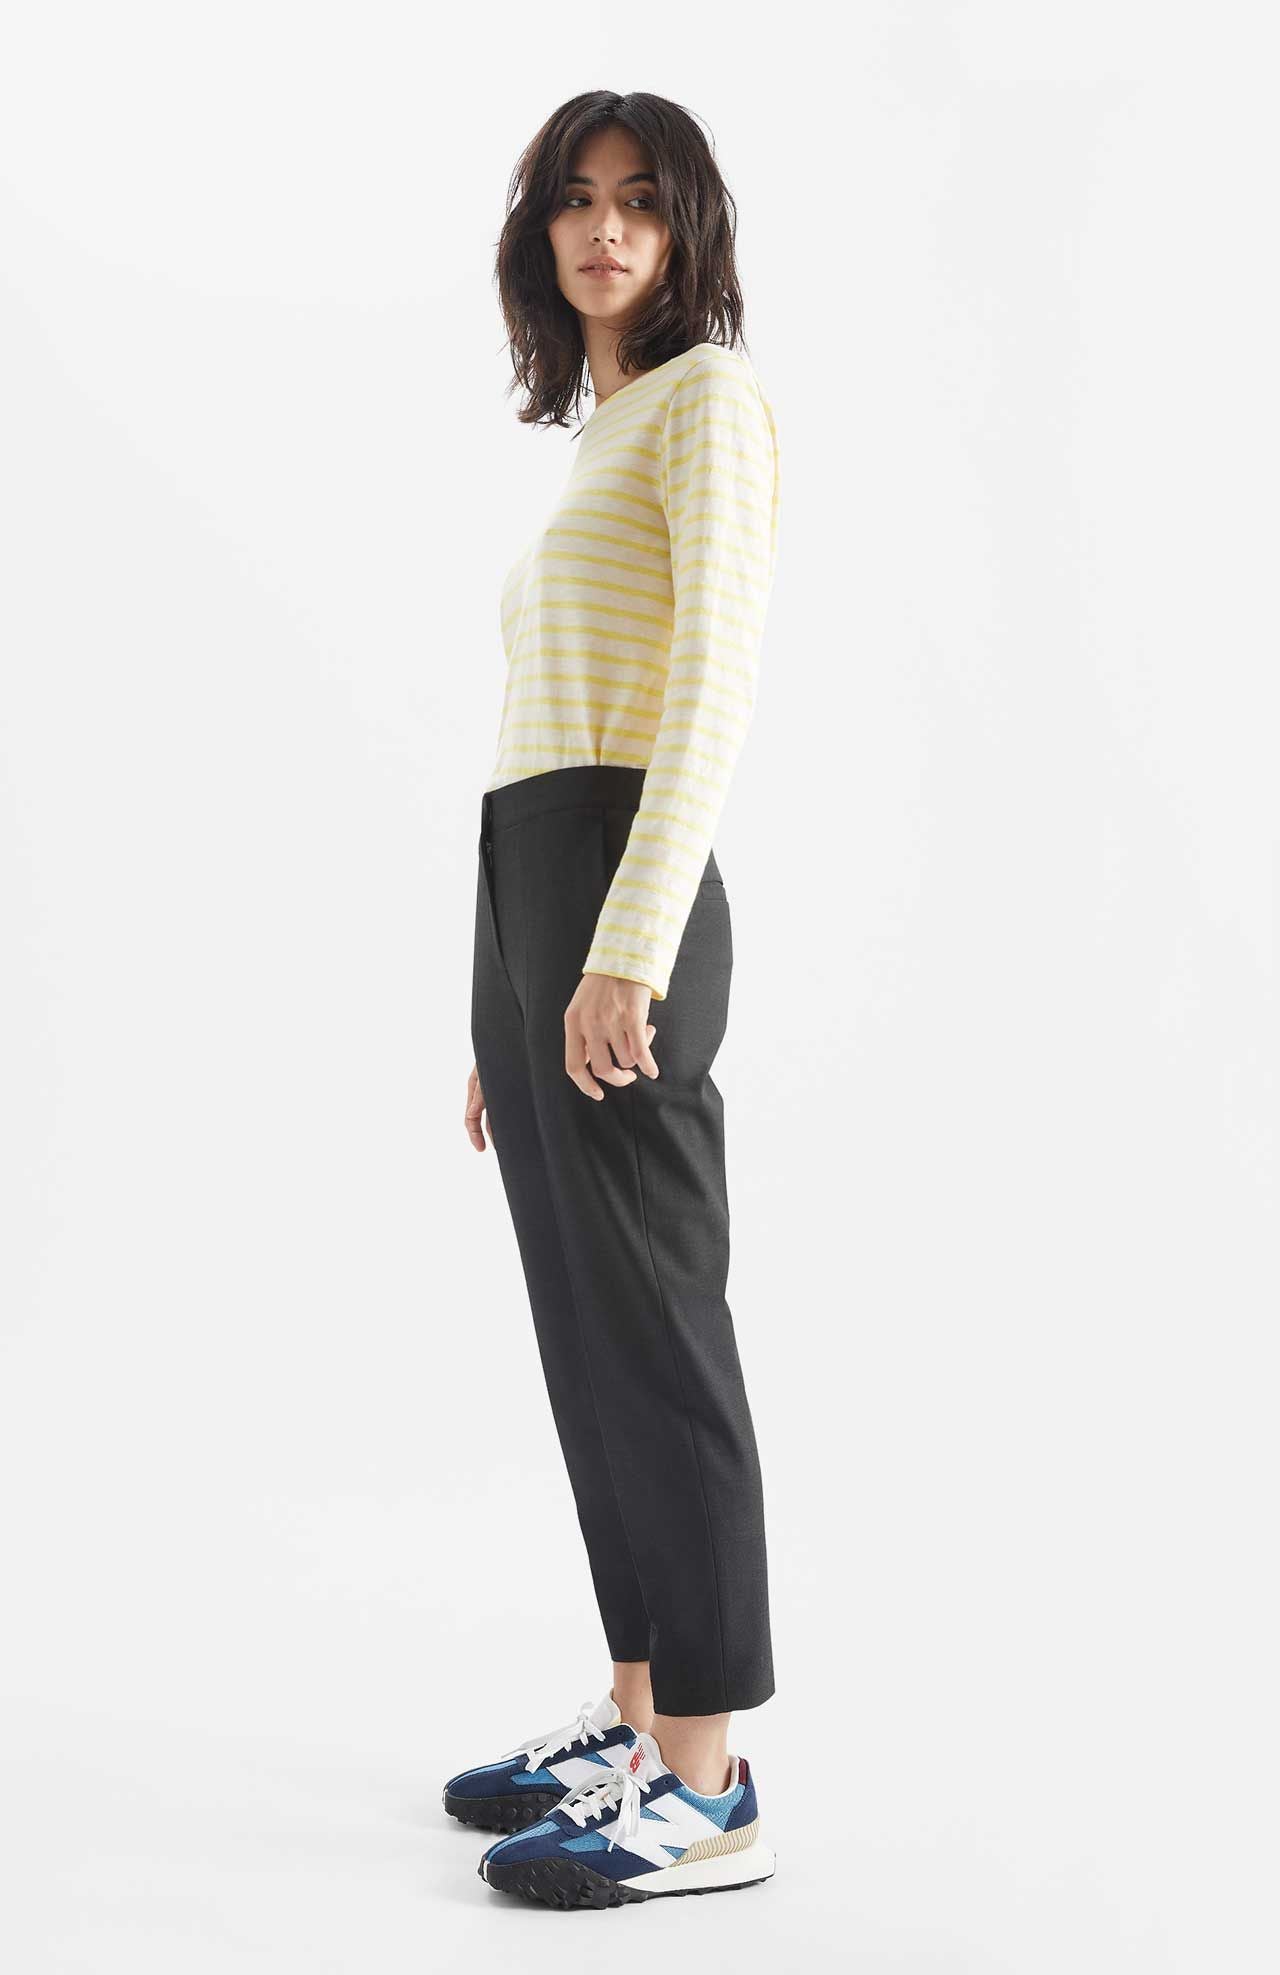 Person wears Alaiak trousers in a dark grey shade. The pants are worn with a yellow and white striped long sleeve top. Side view.